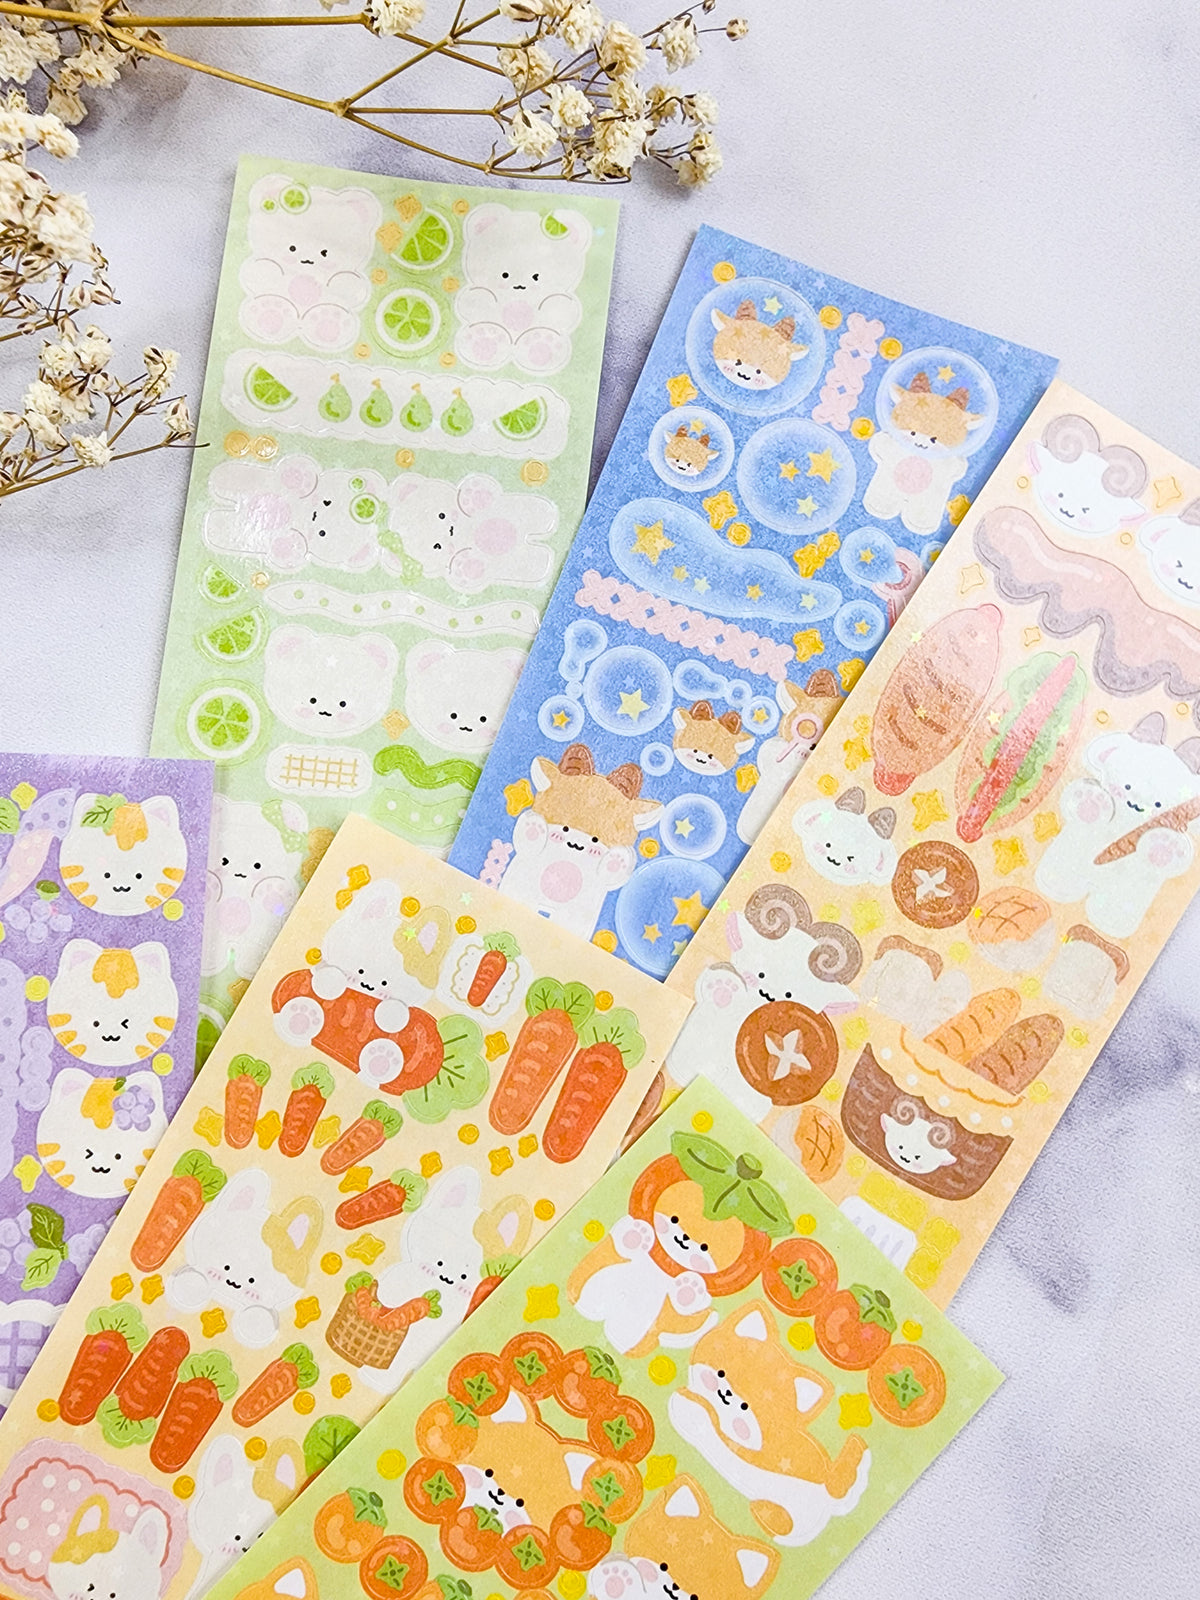 Cute Character Persimmon Stickers